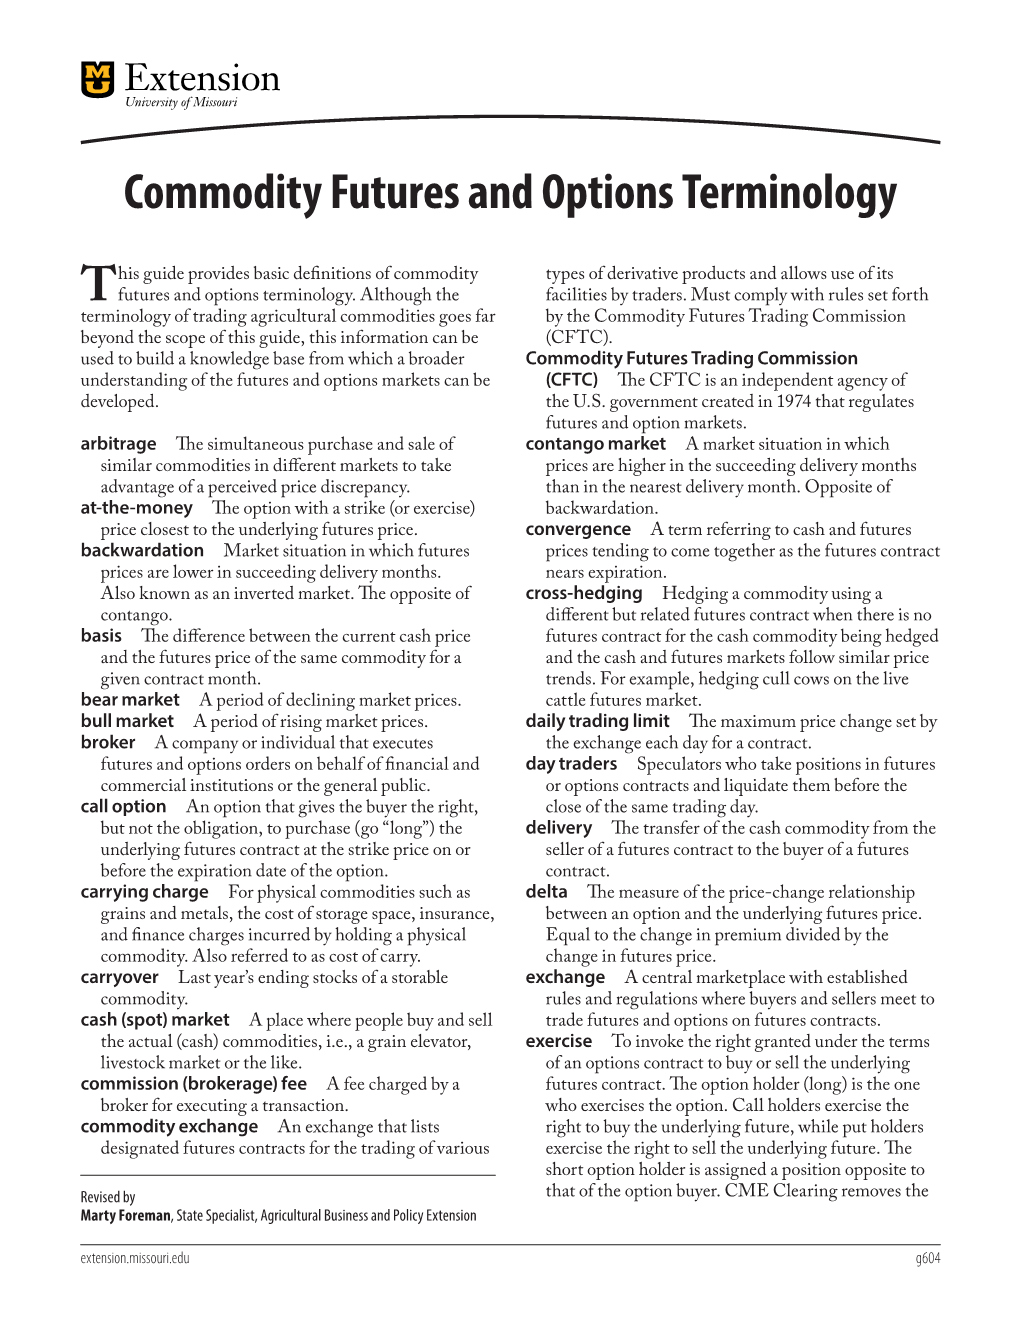 Commodity Futures and Options Terminology